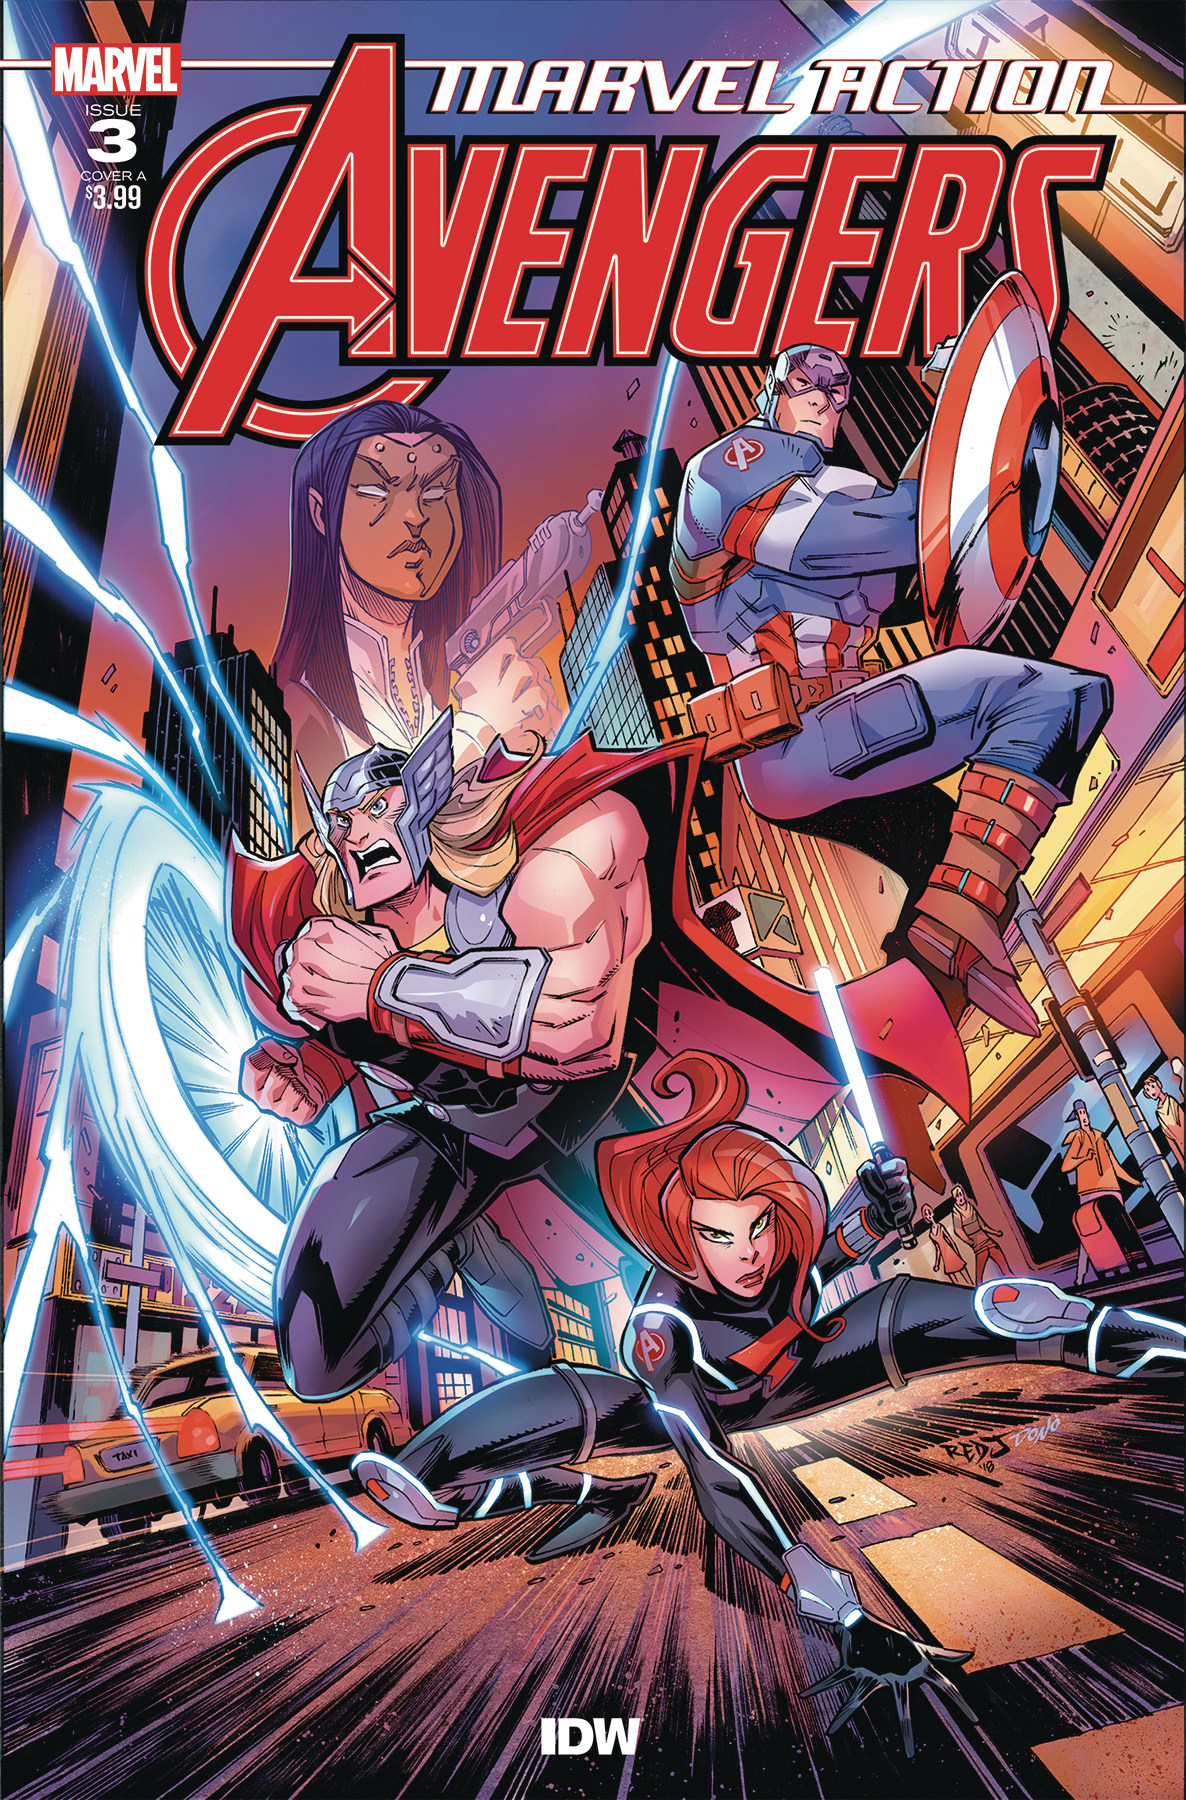 Marvel Action Avengers no. 3 (2018 Series)